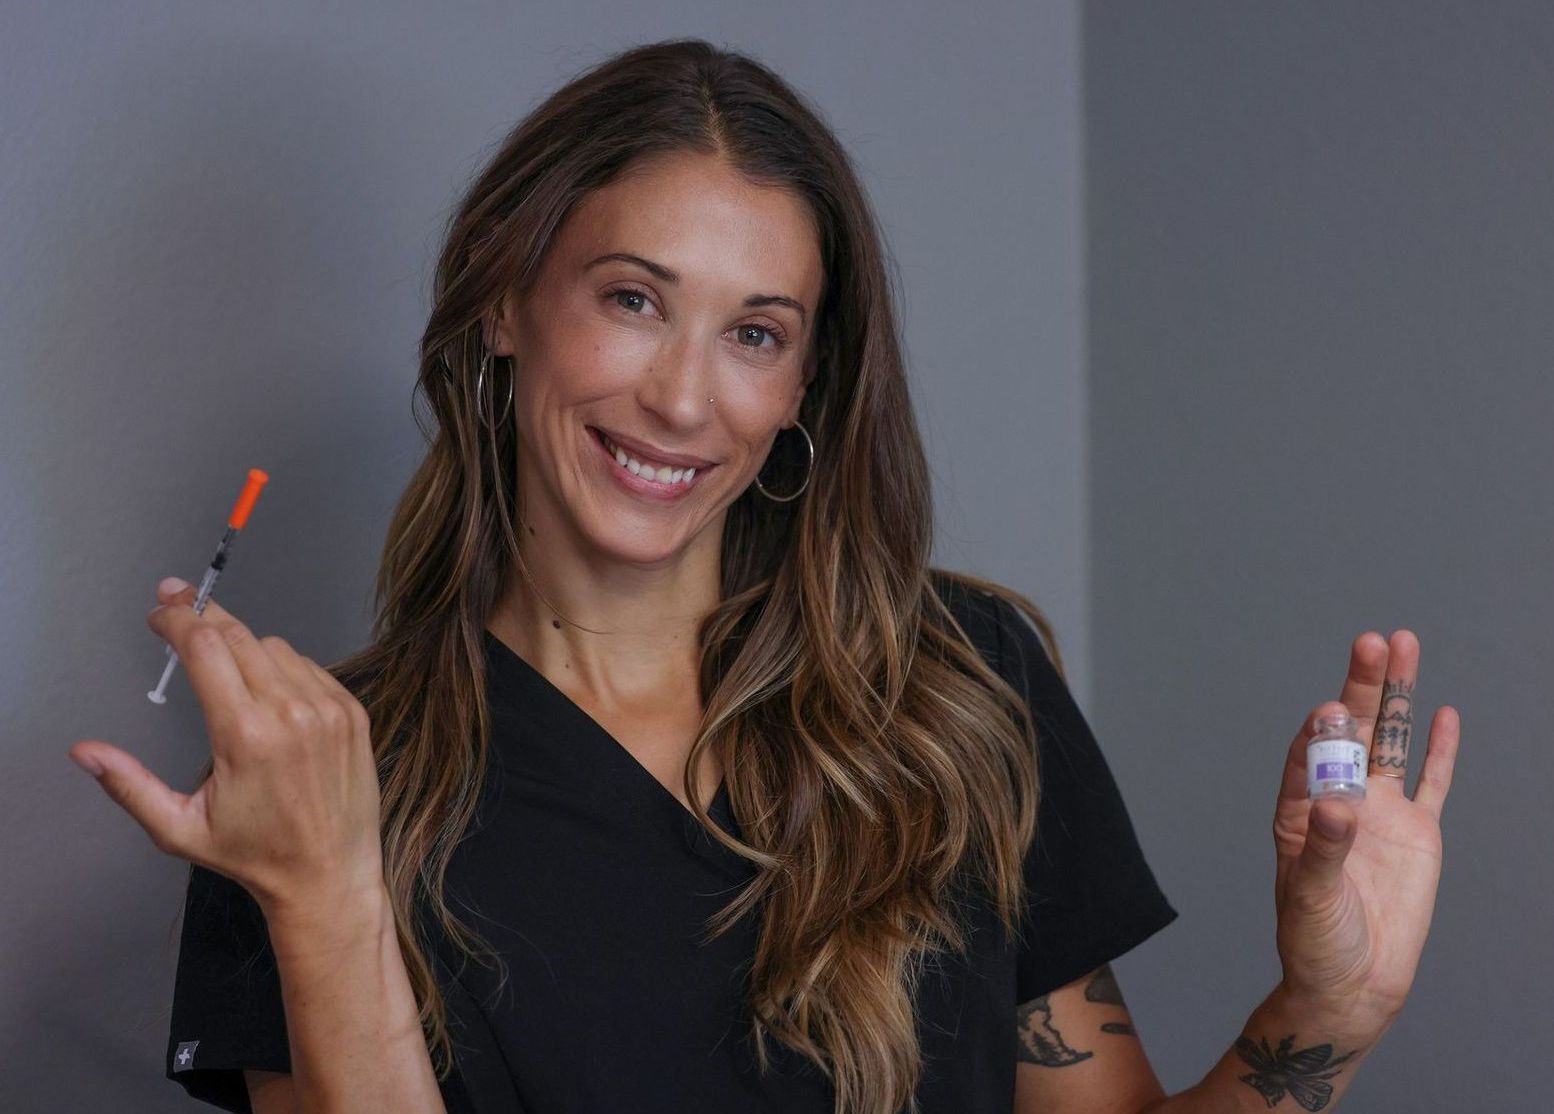 A woman is smiling while holding a syringe and a bottle.